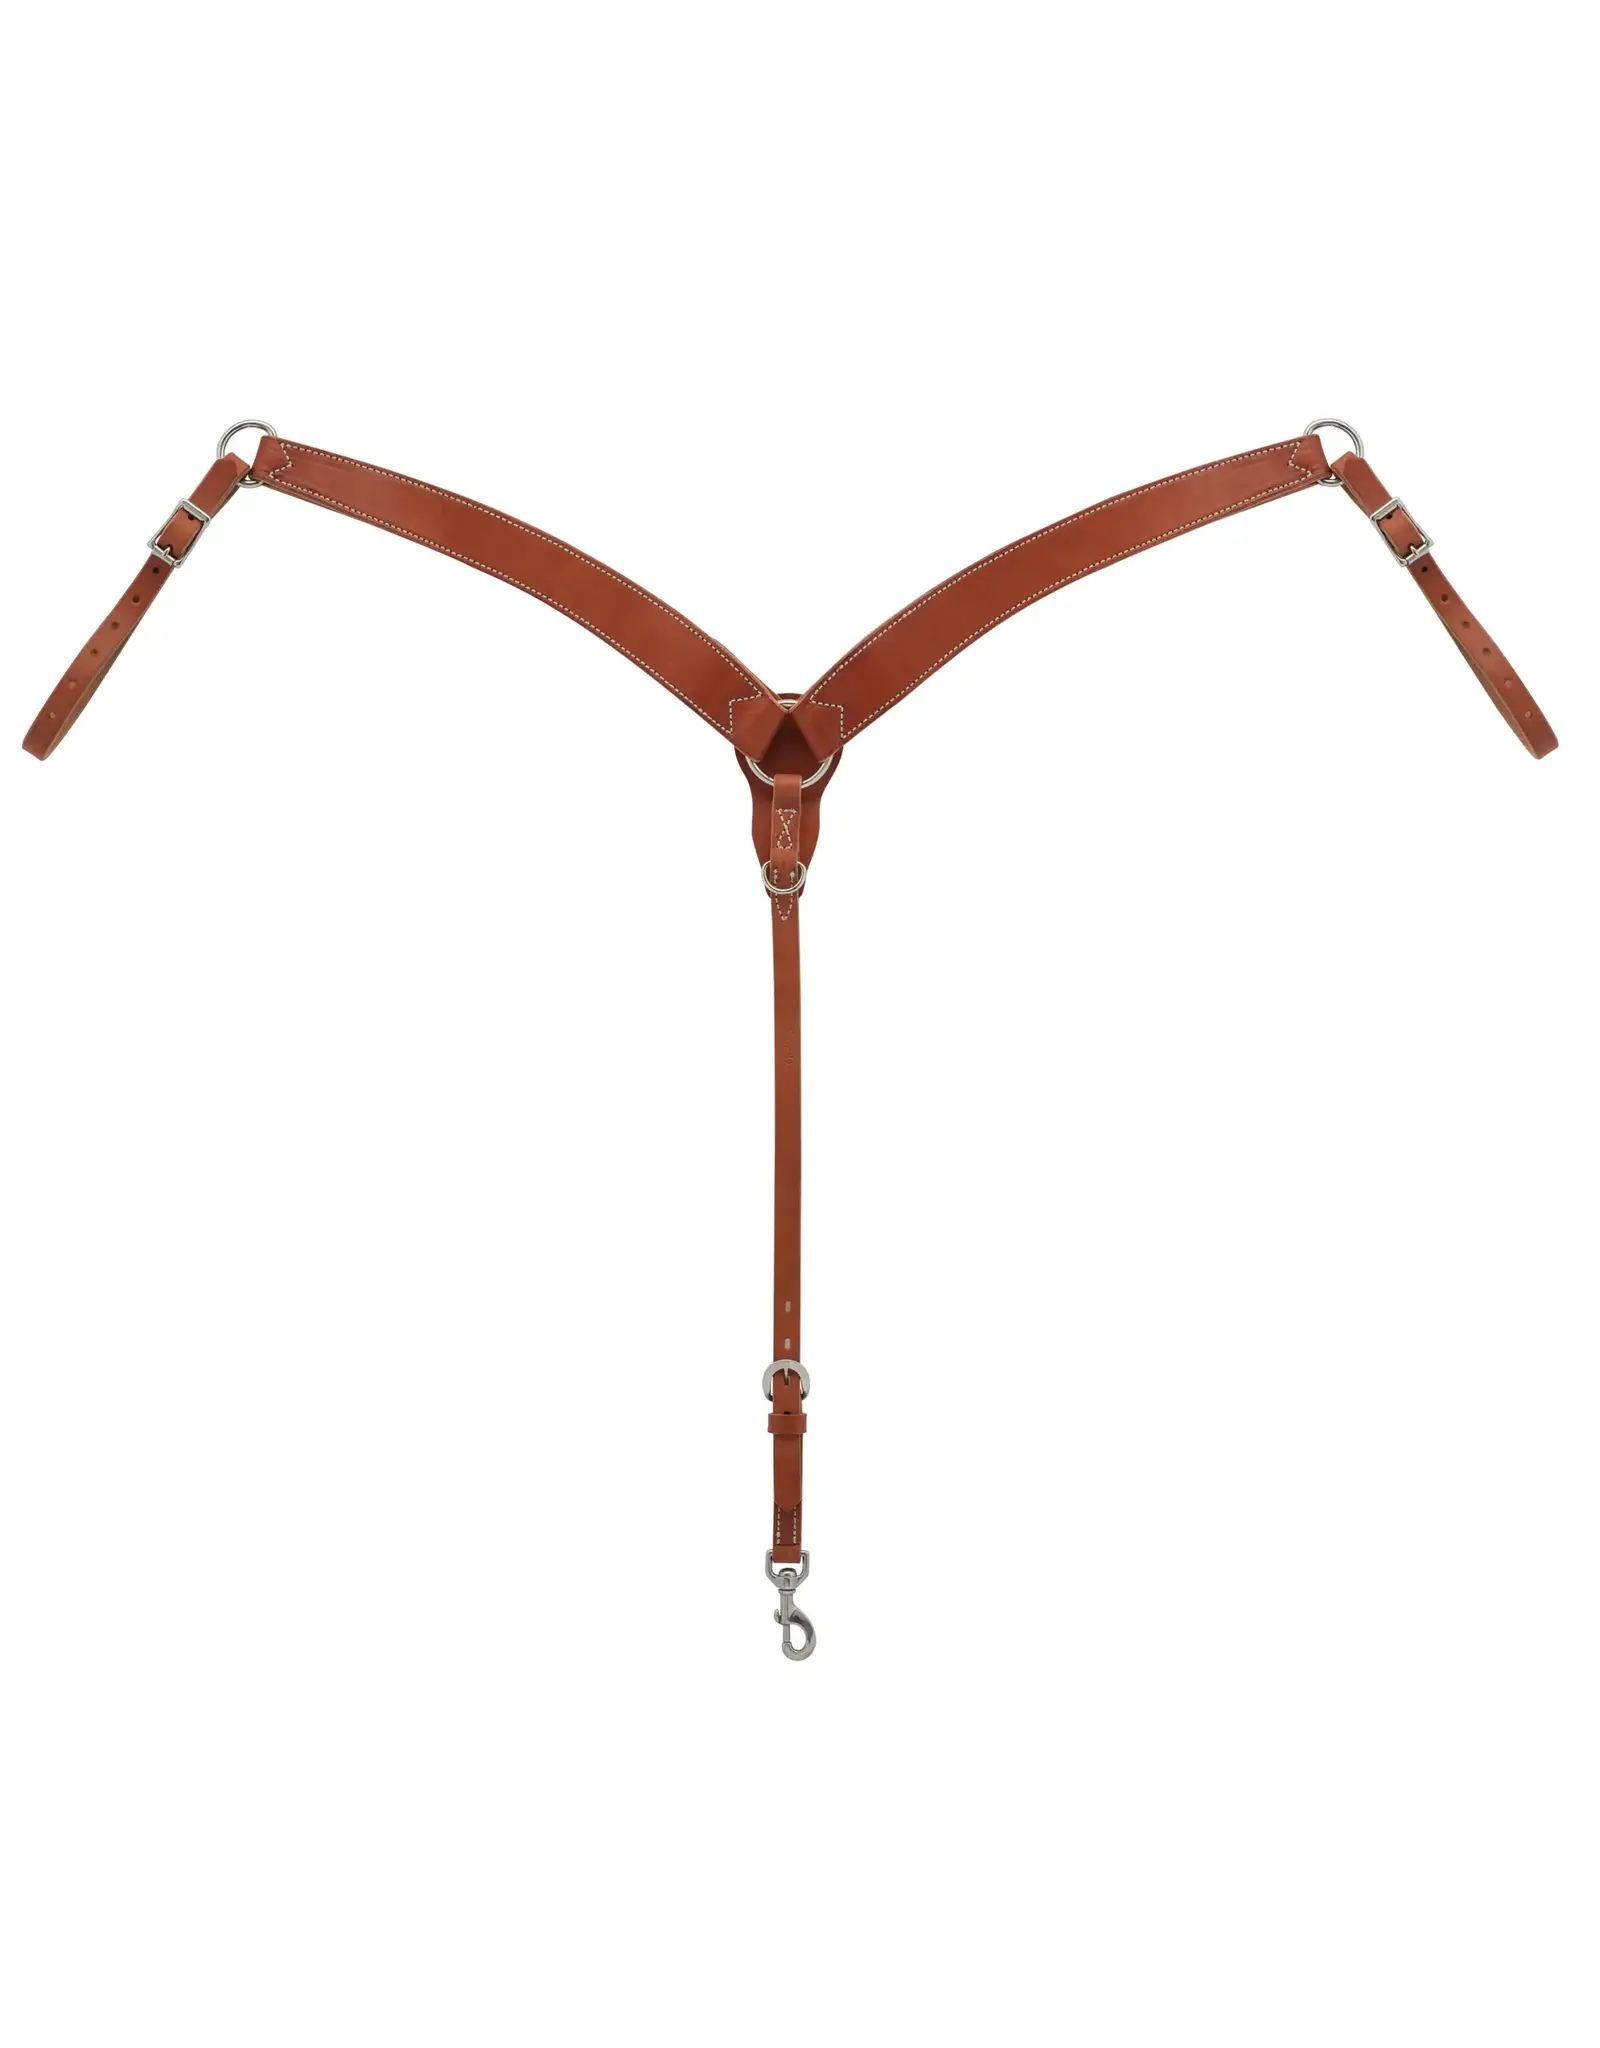 CANYON ROSE CONTOURED BREAST COLLAR - 40-1108